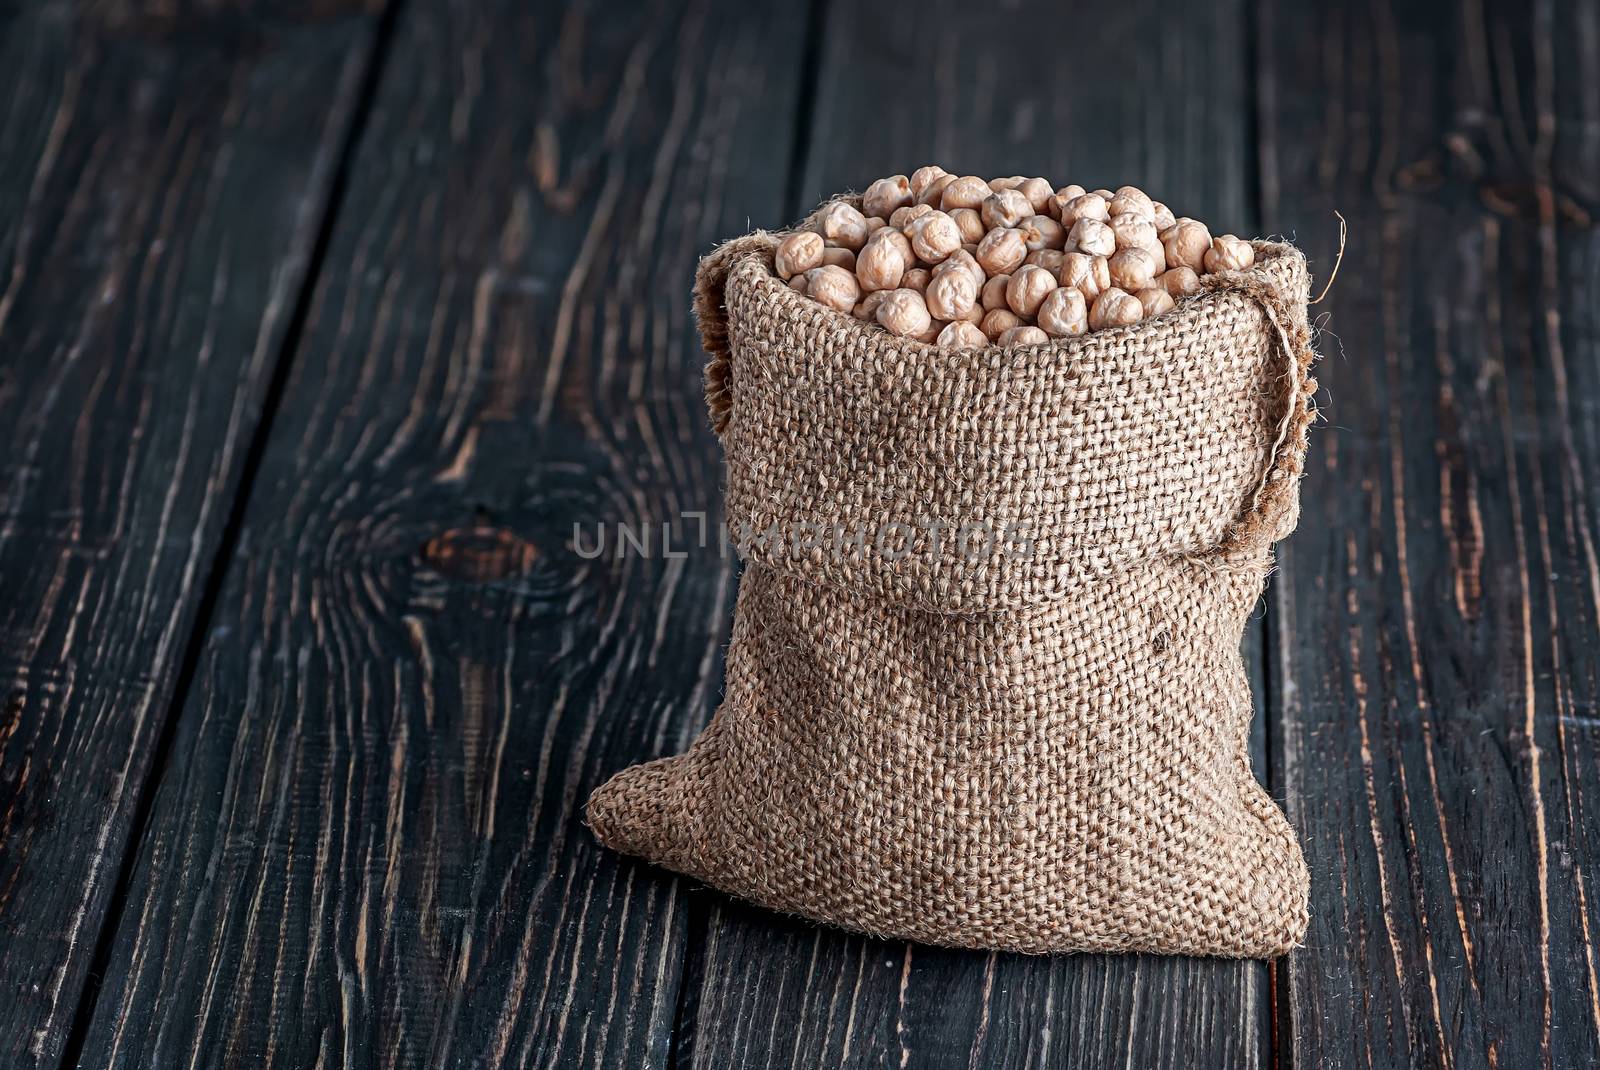 Sack of chickpeas stands on wooden background